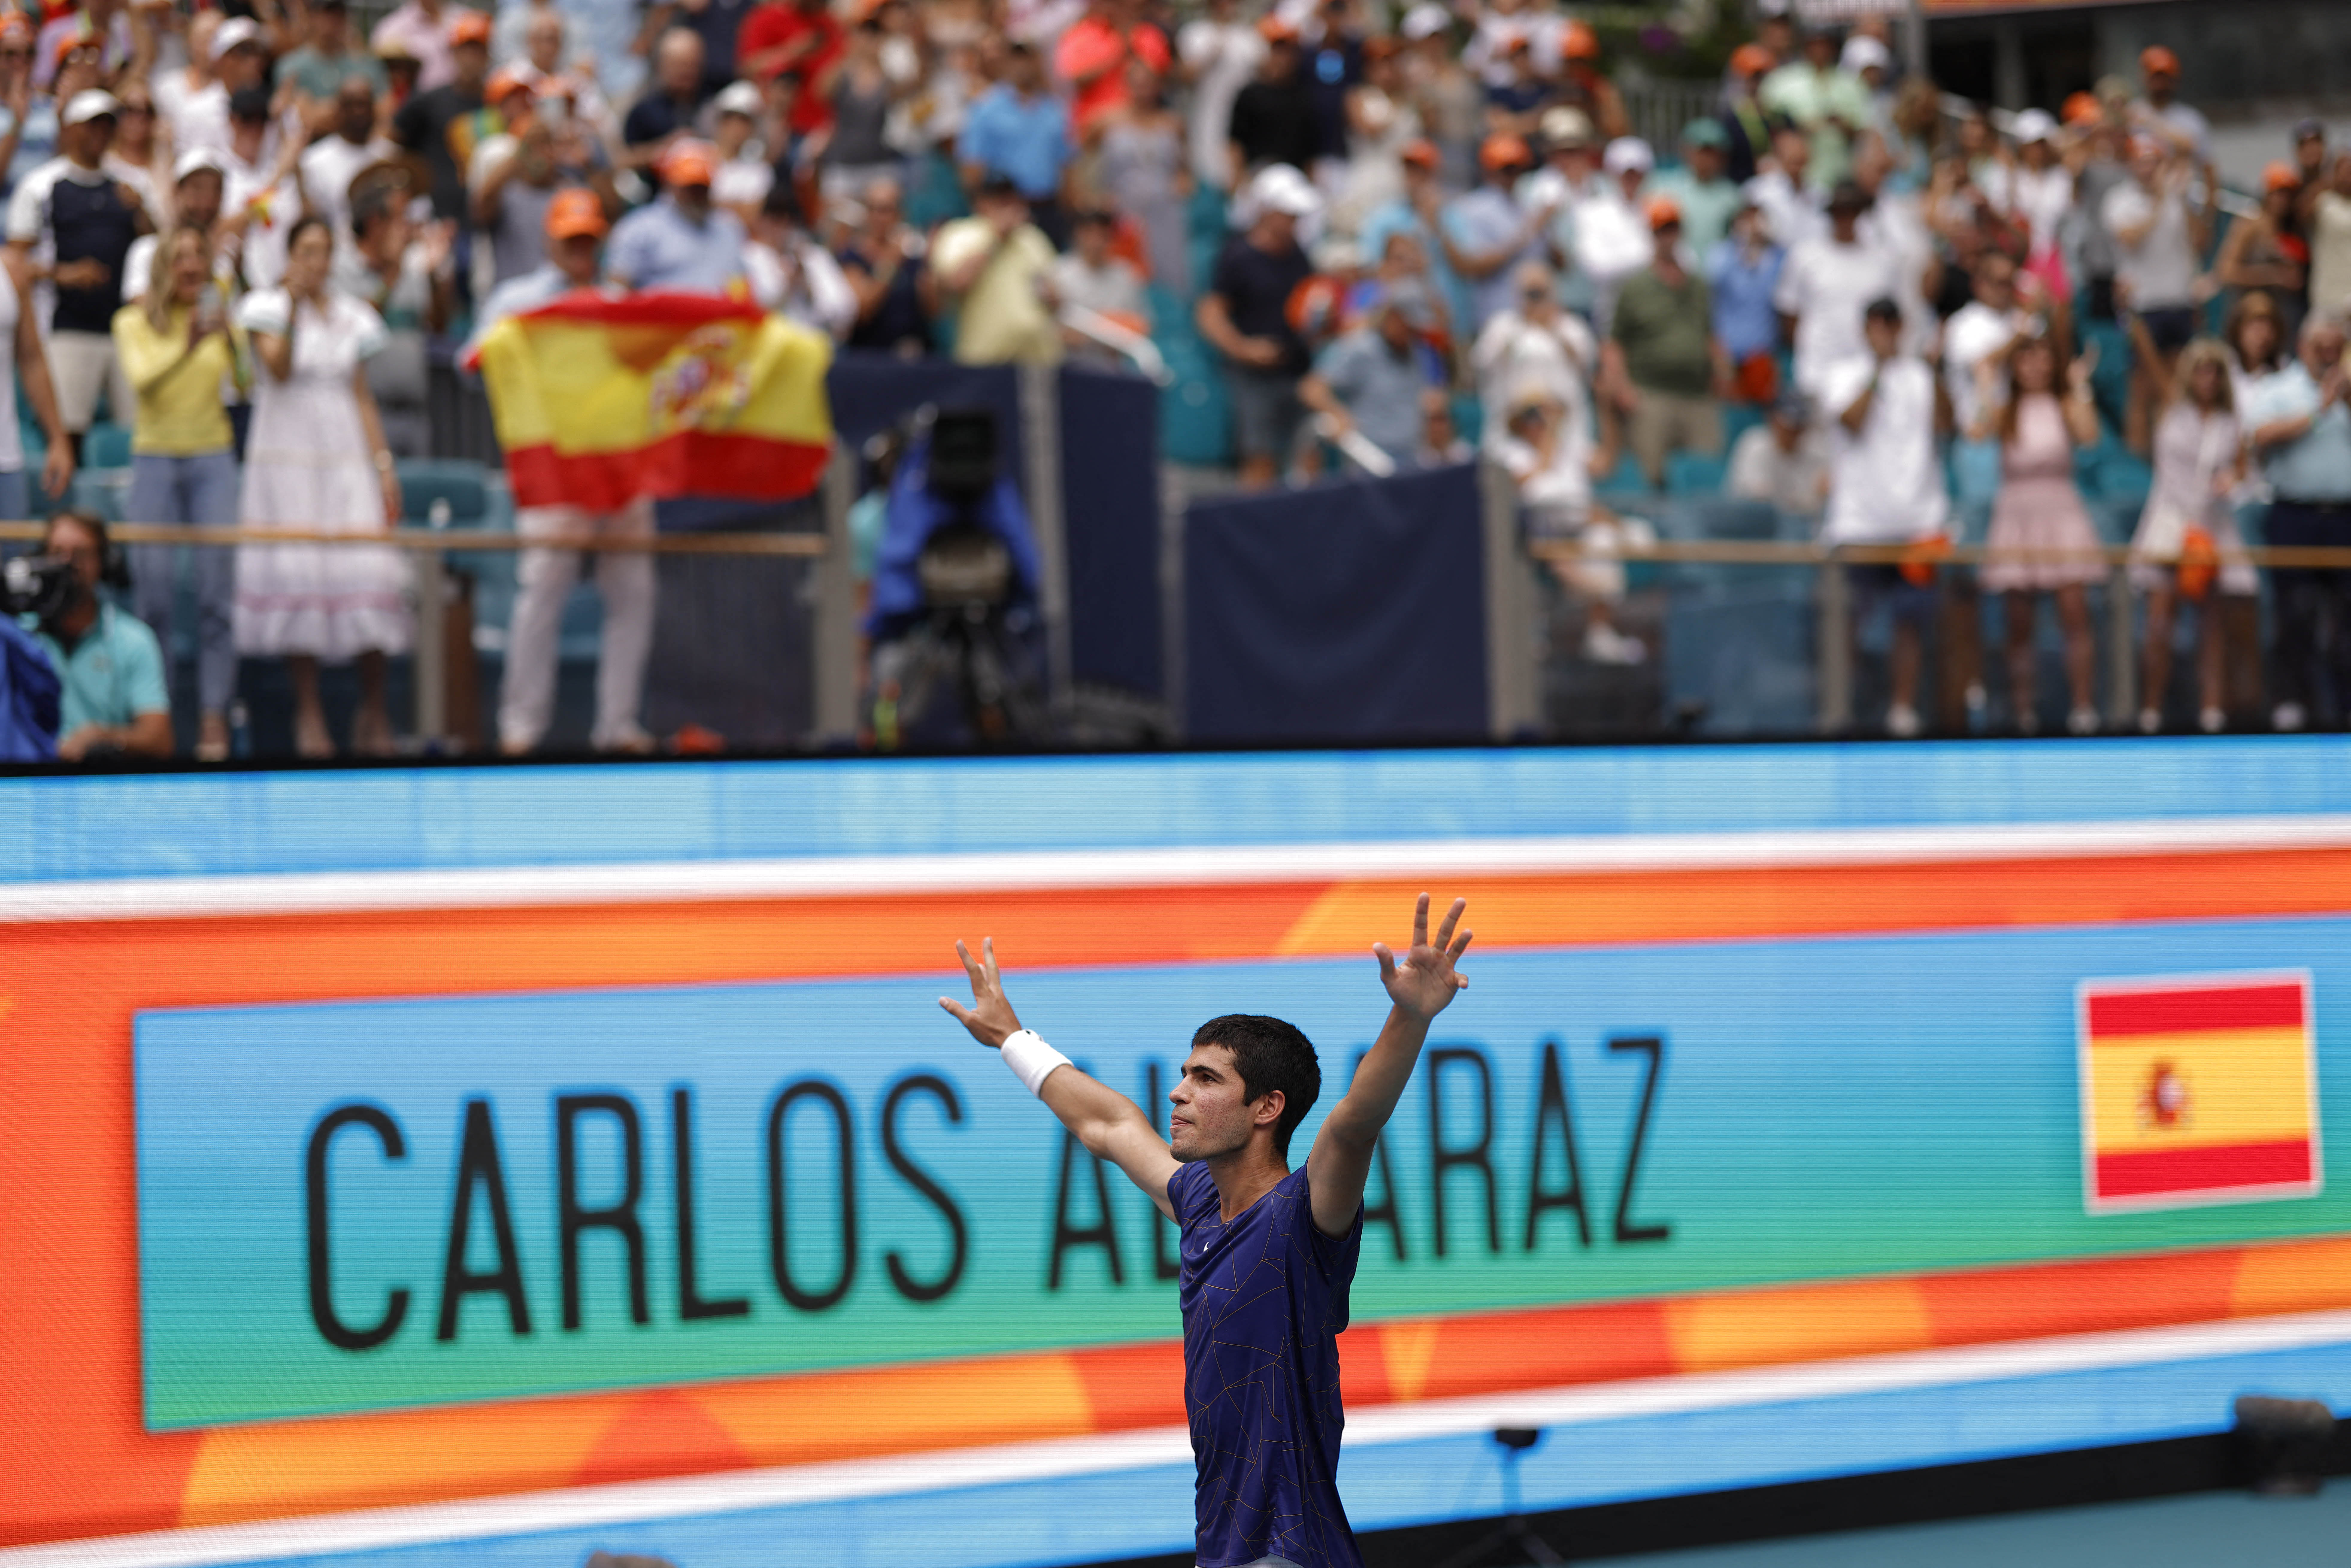 Apr 3, 2022; Miami Gardens, FL, USA; Carlos Alcaraz (ESP) salutes the crowd after his match against Casper Ruud (NOR)(not pictured) in the men's singles final in the Miami Open at Hard Rock Stadium. 